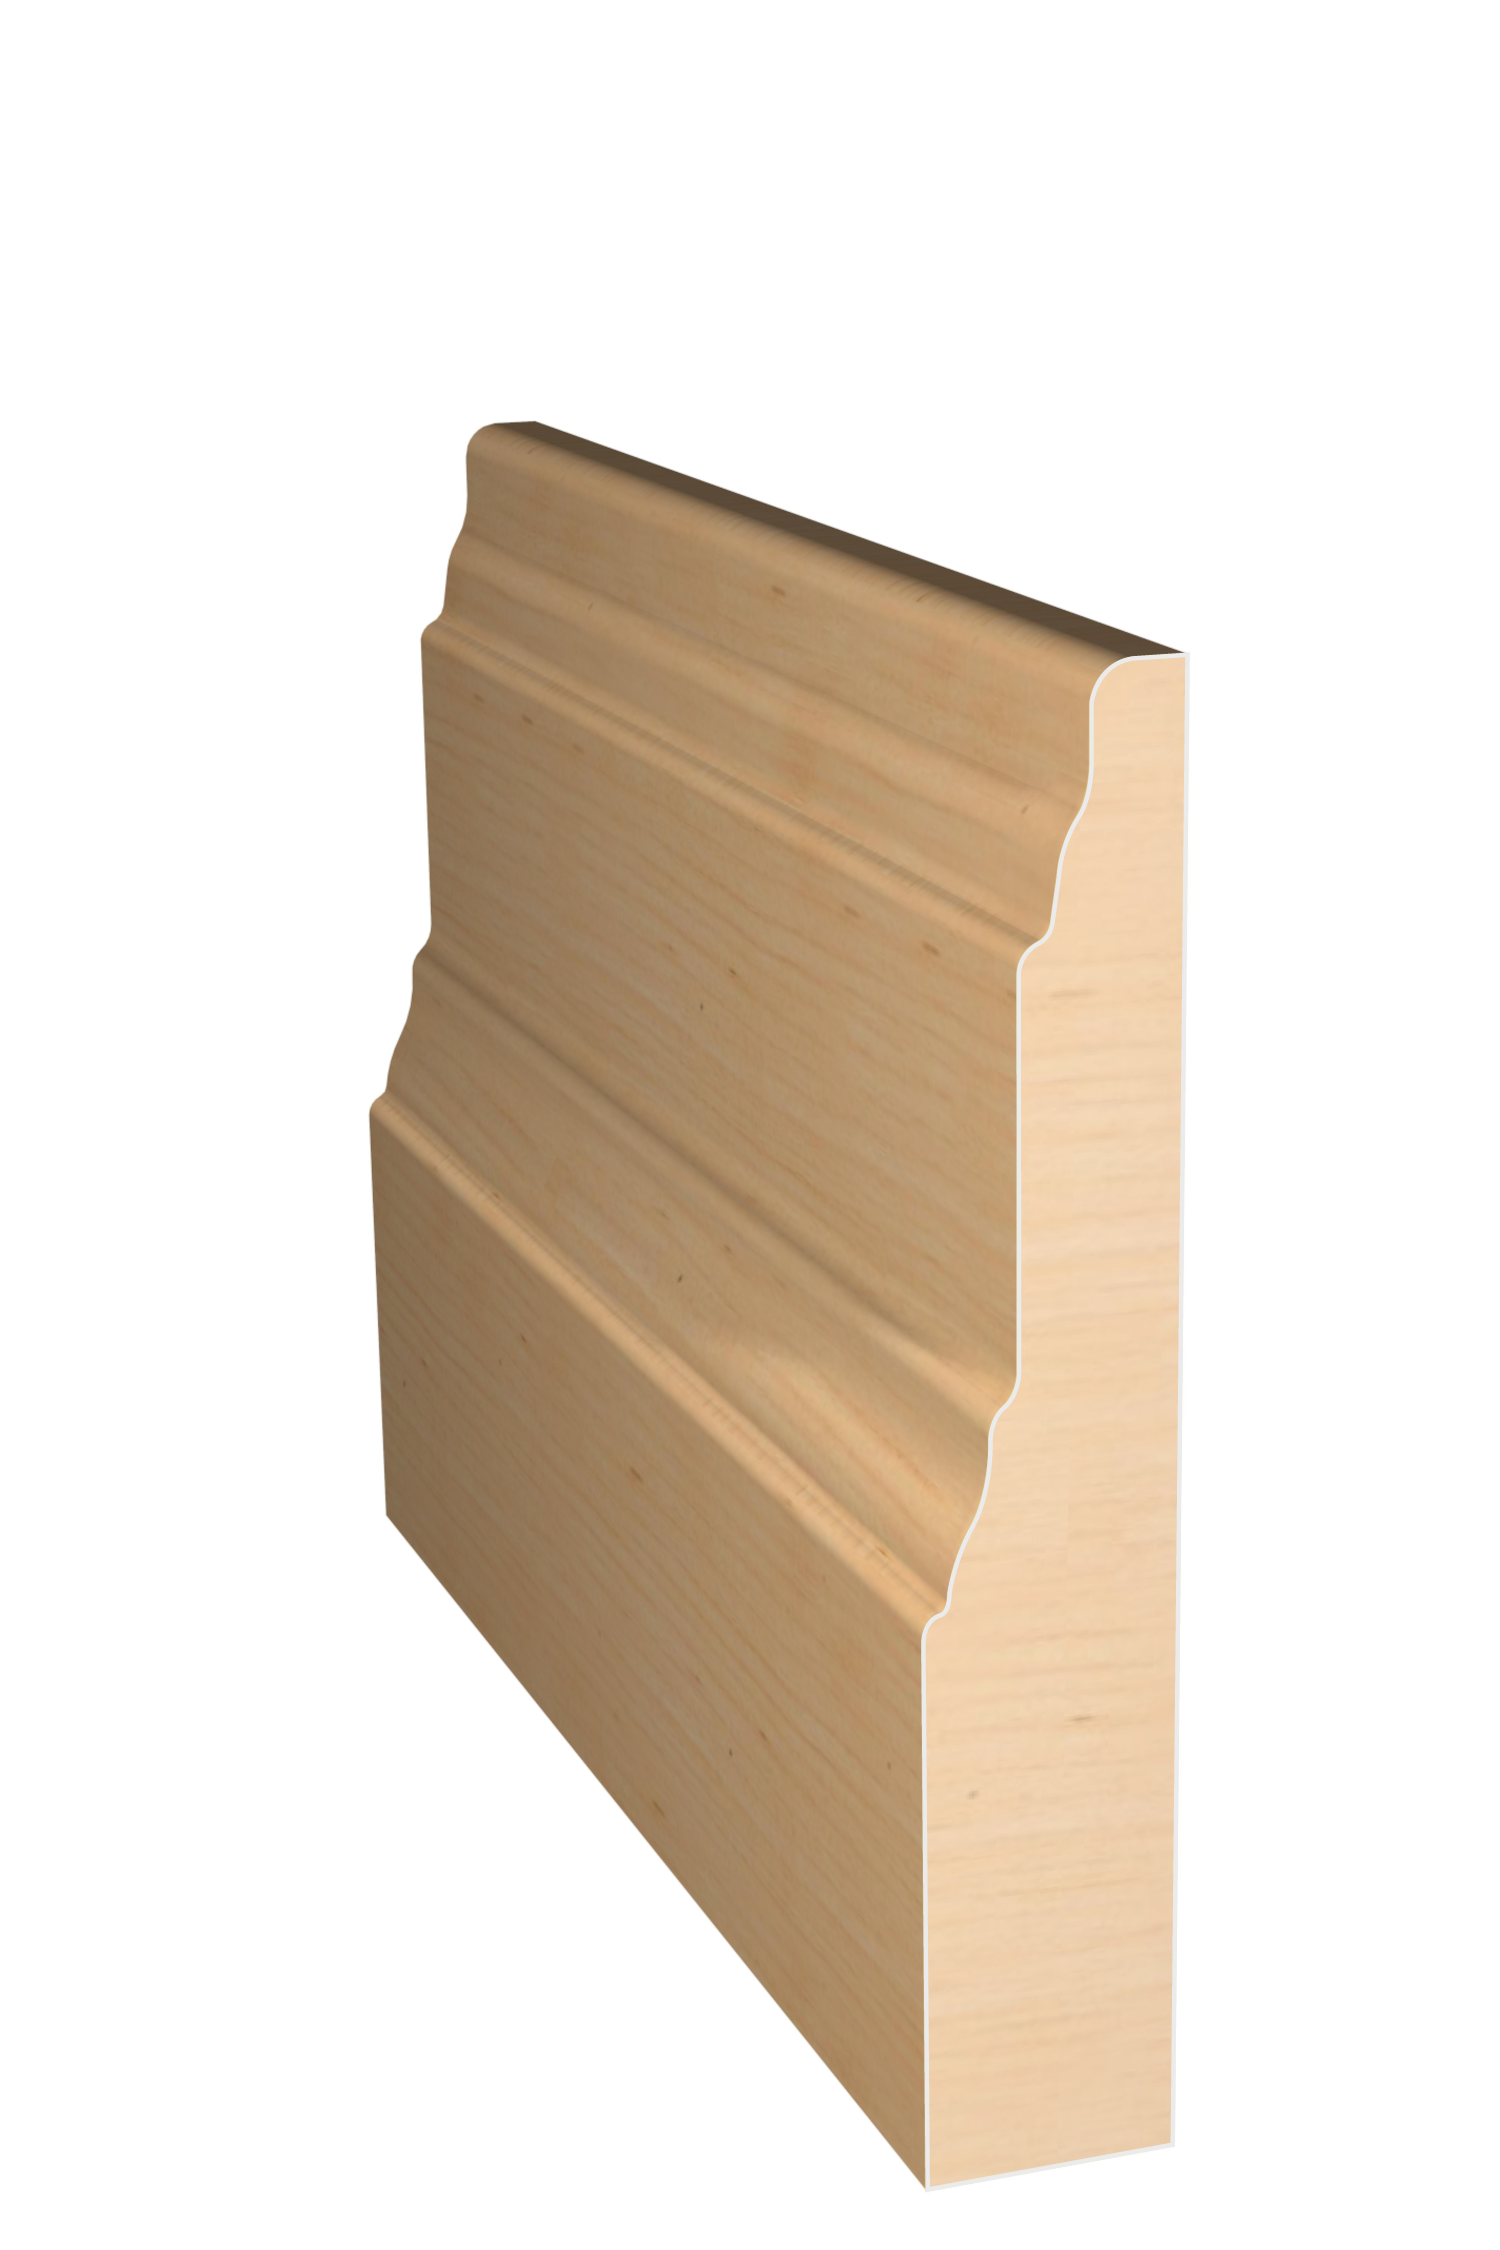 Three dimensional rendering of custom base wood molding BAPL4149 made by Public Lumber Company in Detroit.